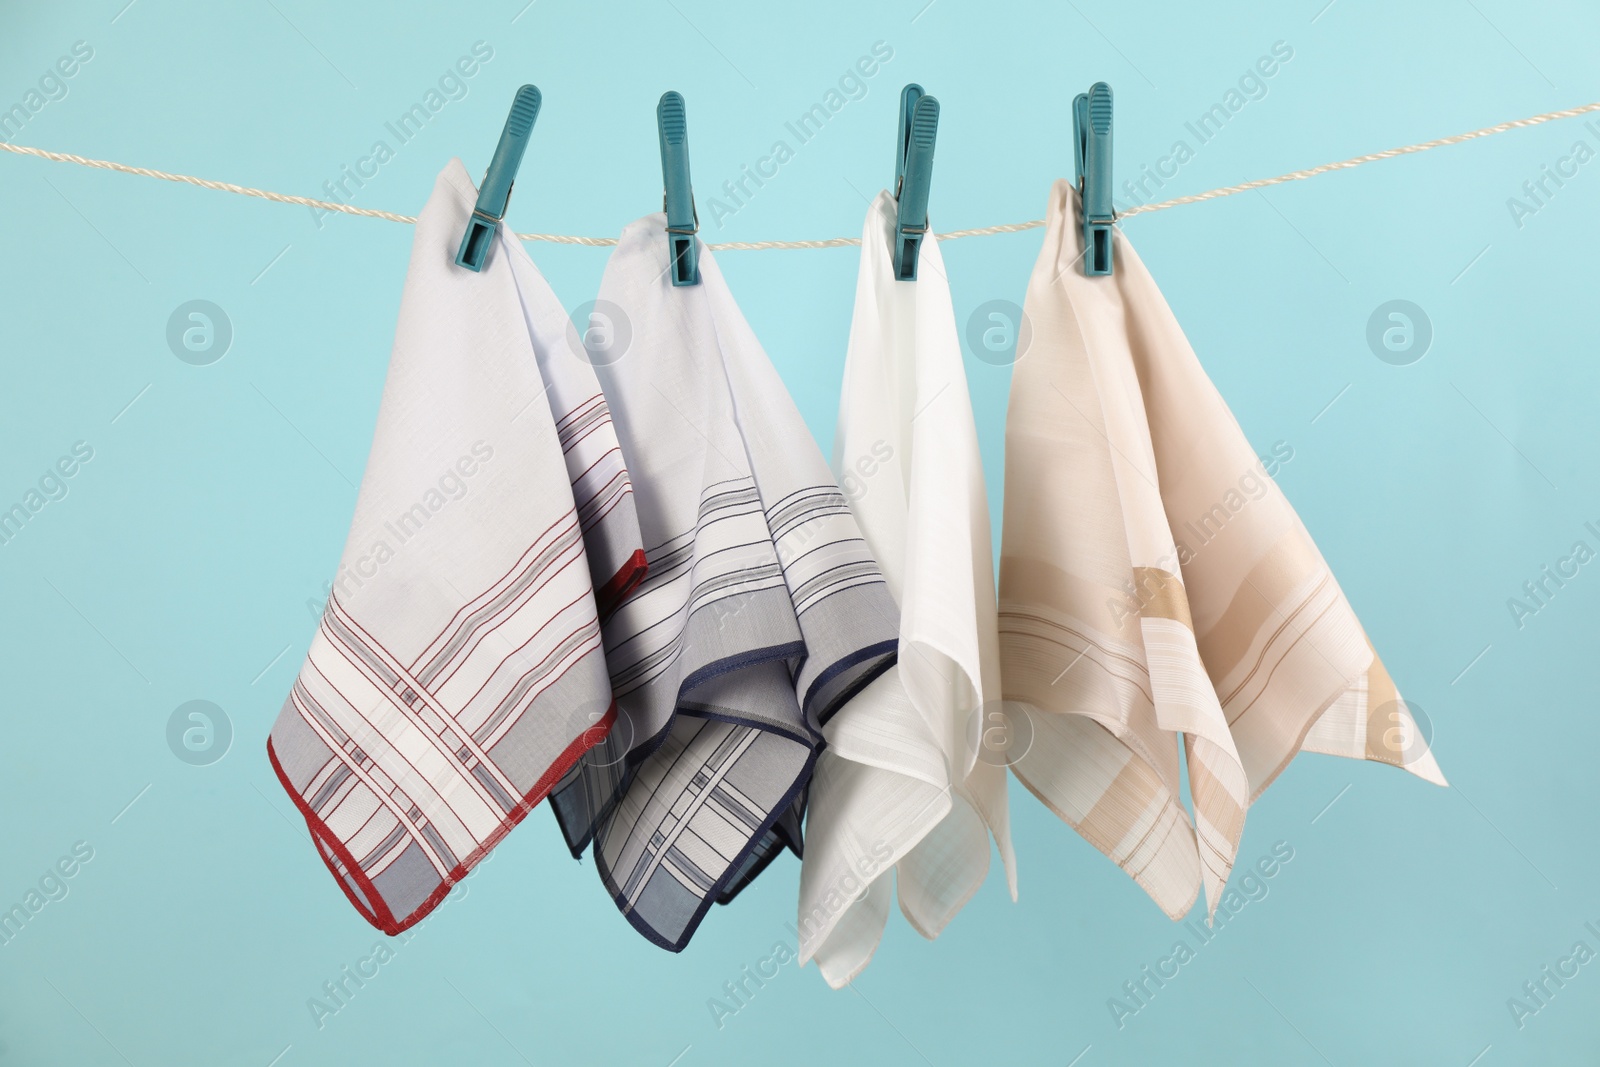 Photo of Many different handkerchiefs hanging on rope against light blue background